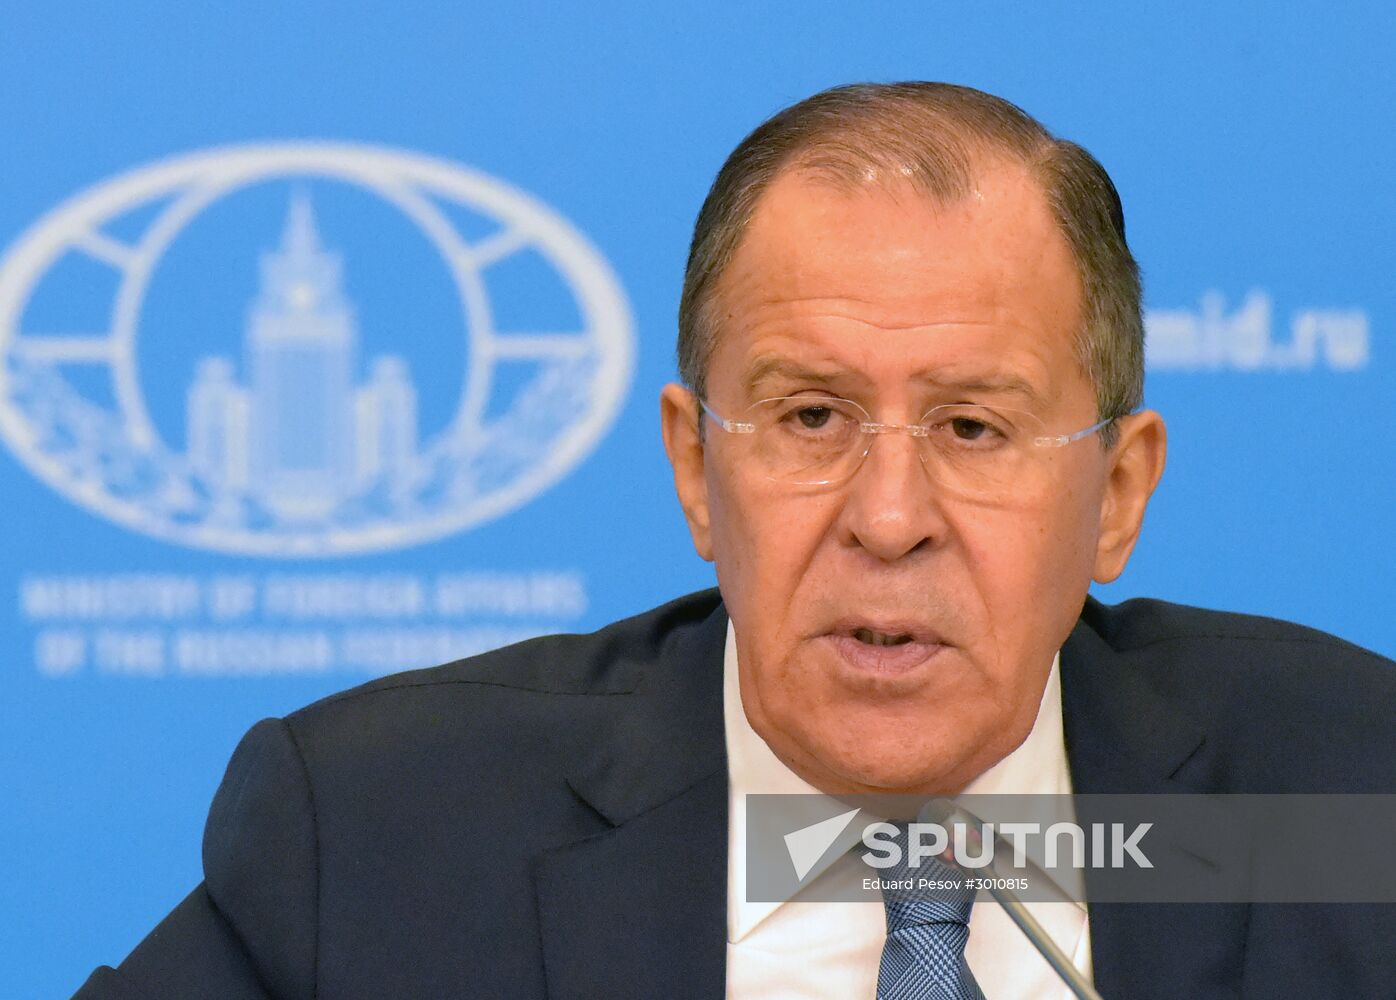 News conference with Russian Foreign Minister Sergei Lavrov